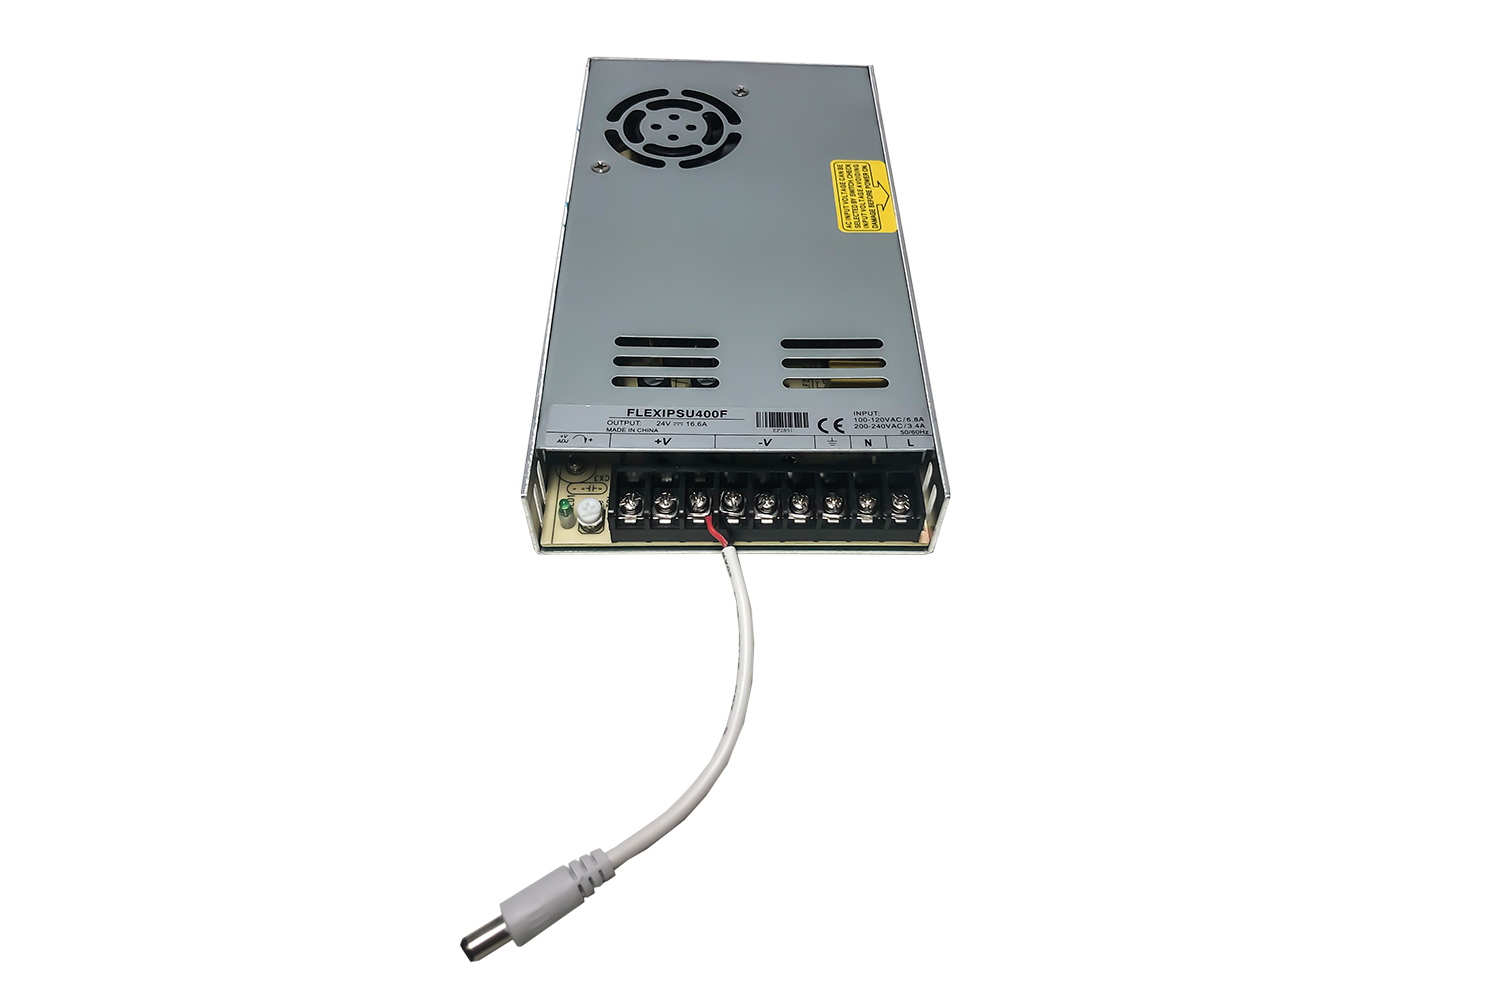 FLEXIPSU400F - power supply 400W, 24VDC output, Open frame style front view 